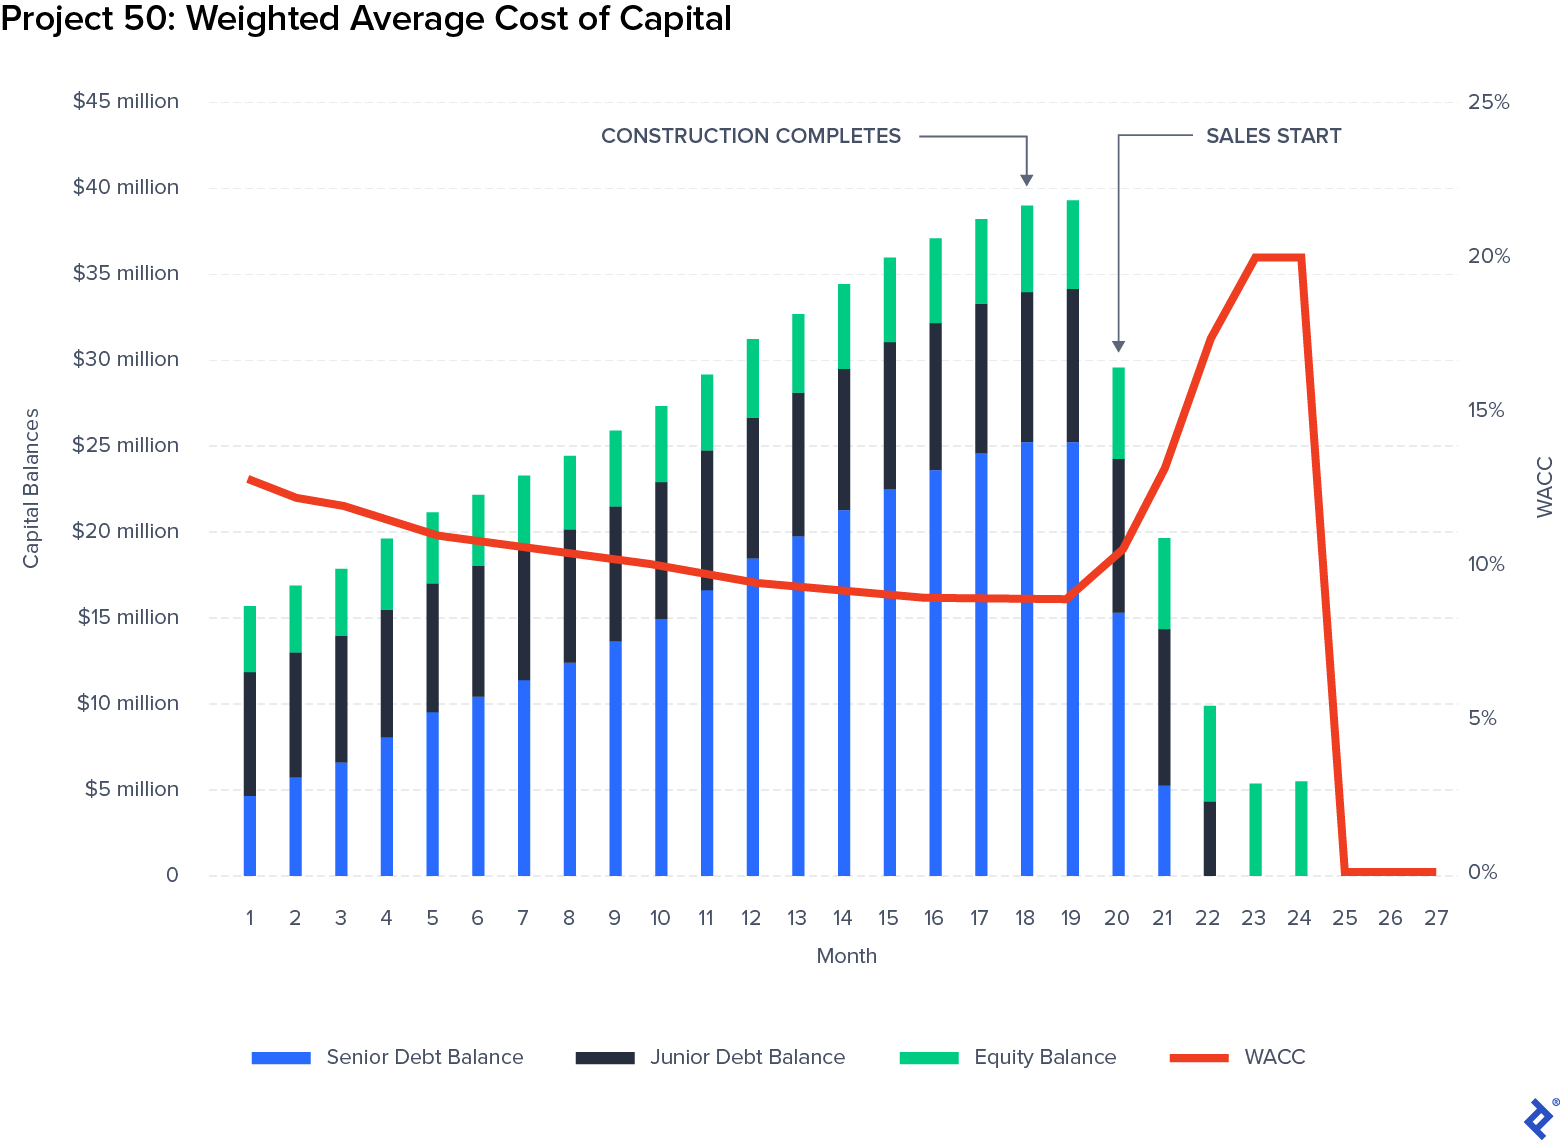 Financial modeling shows how the weighted average cost of capital relates to scenario where junior debt and equity is completely drawn upfront, while the much larger senior debt loan is drawn in installments throughout the 18-month construction period. As debt rises, the WACC steadily drops, bottoming out at month 19 before rising in month 20 when sales commence and senior debt begins to be paid off significantly.